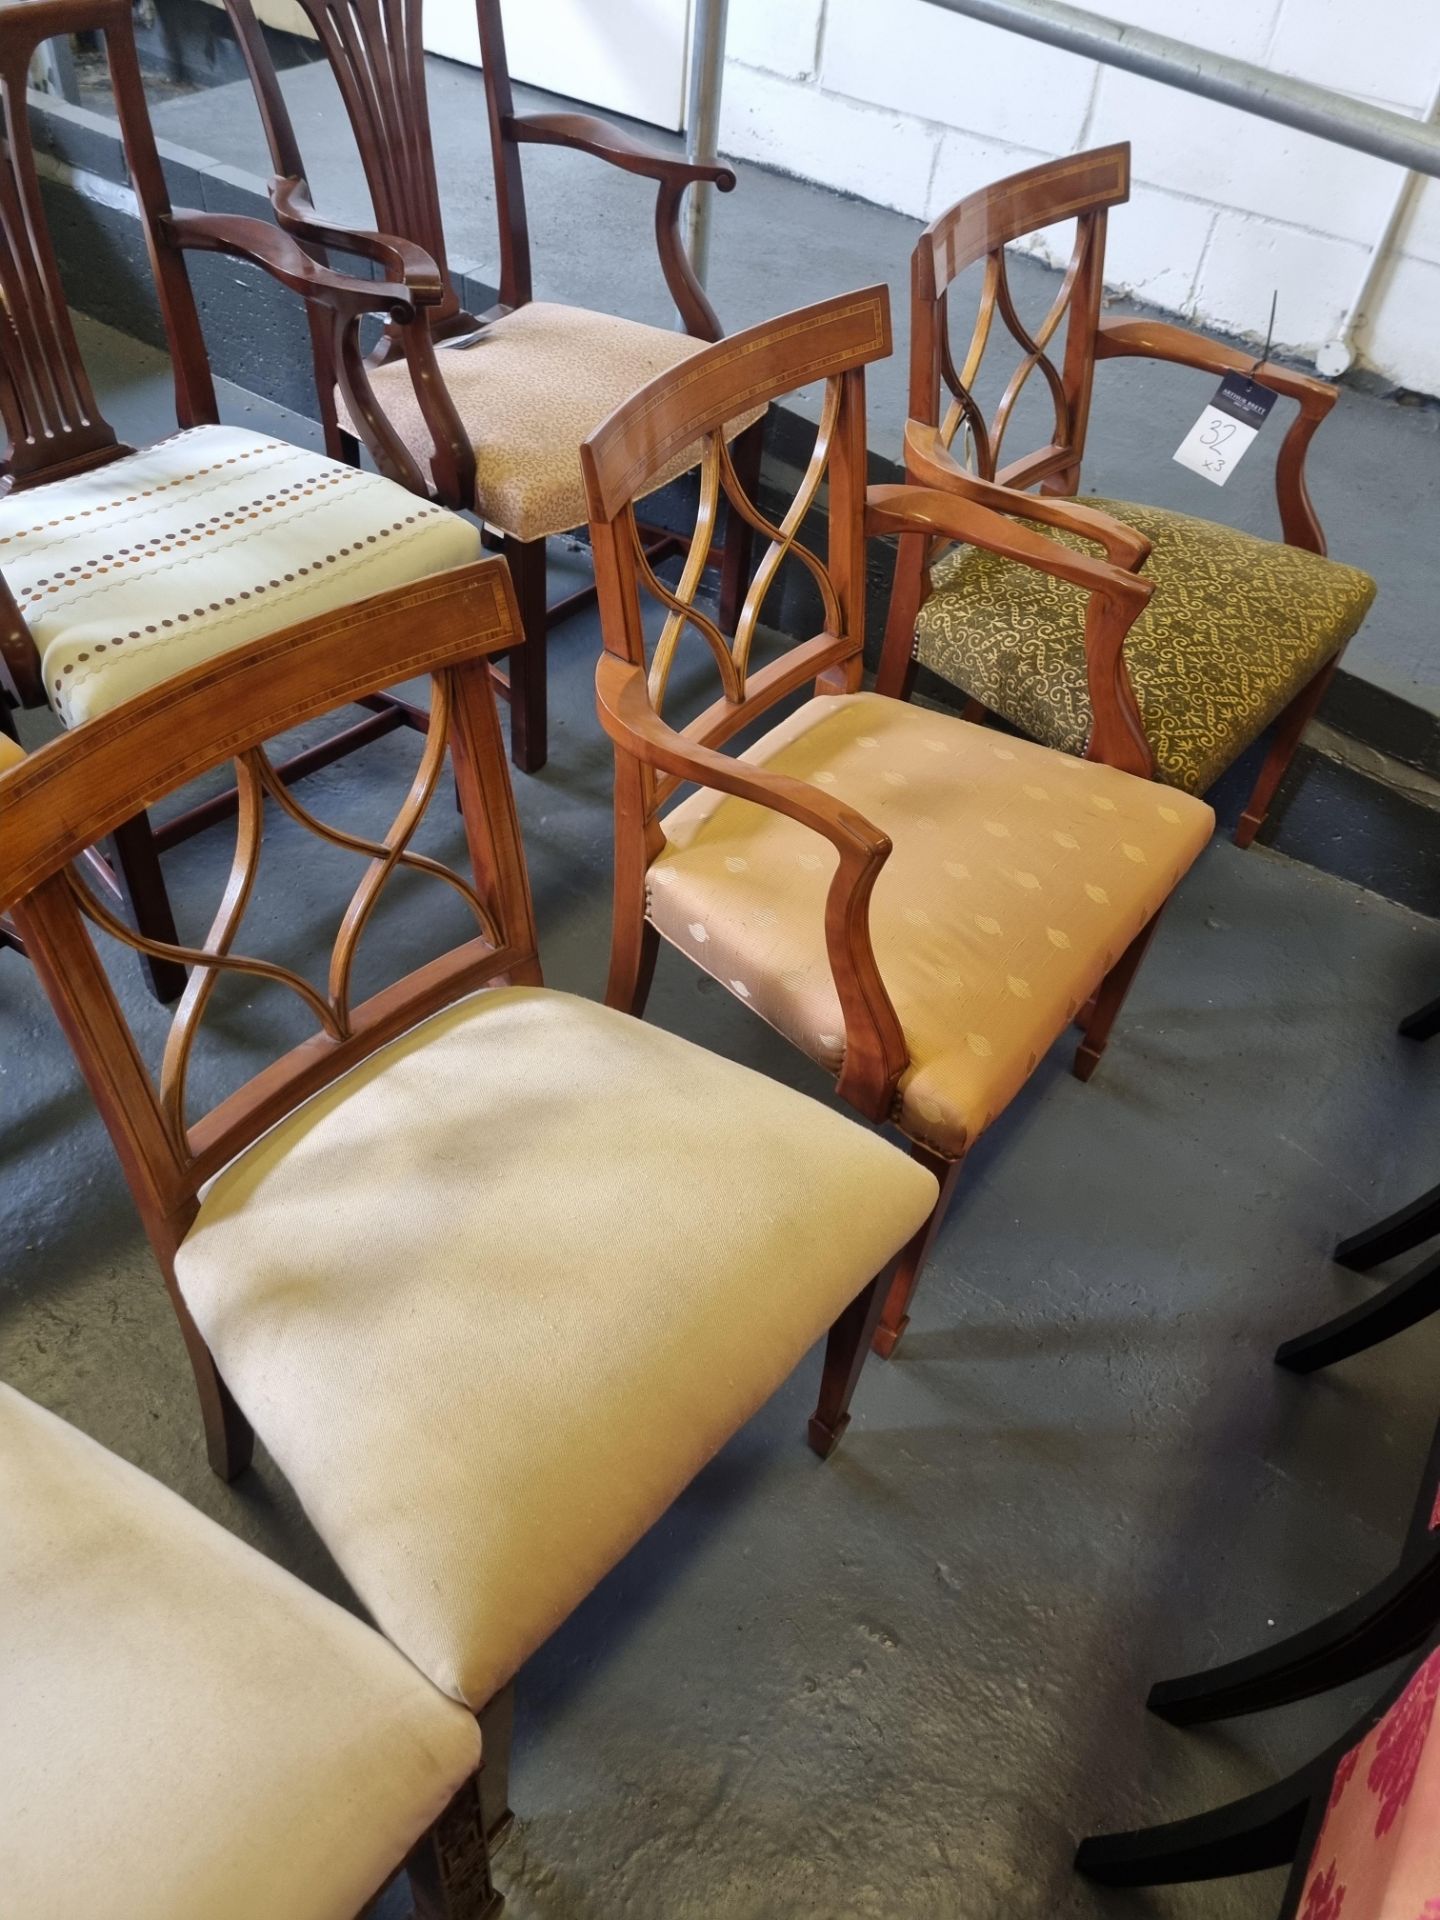 3 X Arthur Brett Sheraton-Style Cherrywood Upholstered Dining Chairs With Tulip-Wood Inlay In The - Image 2 of 5